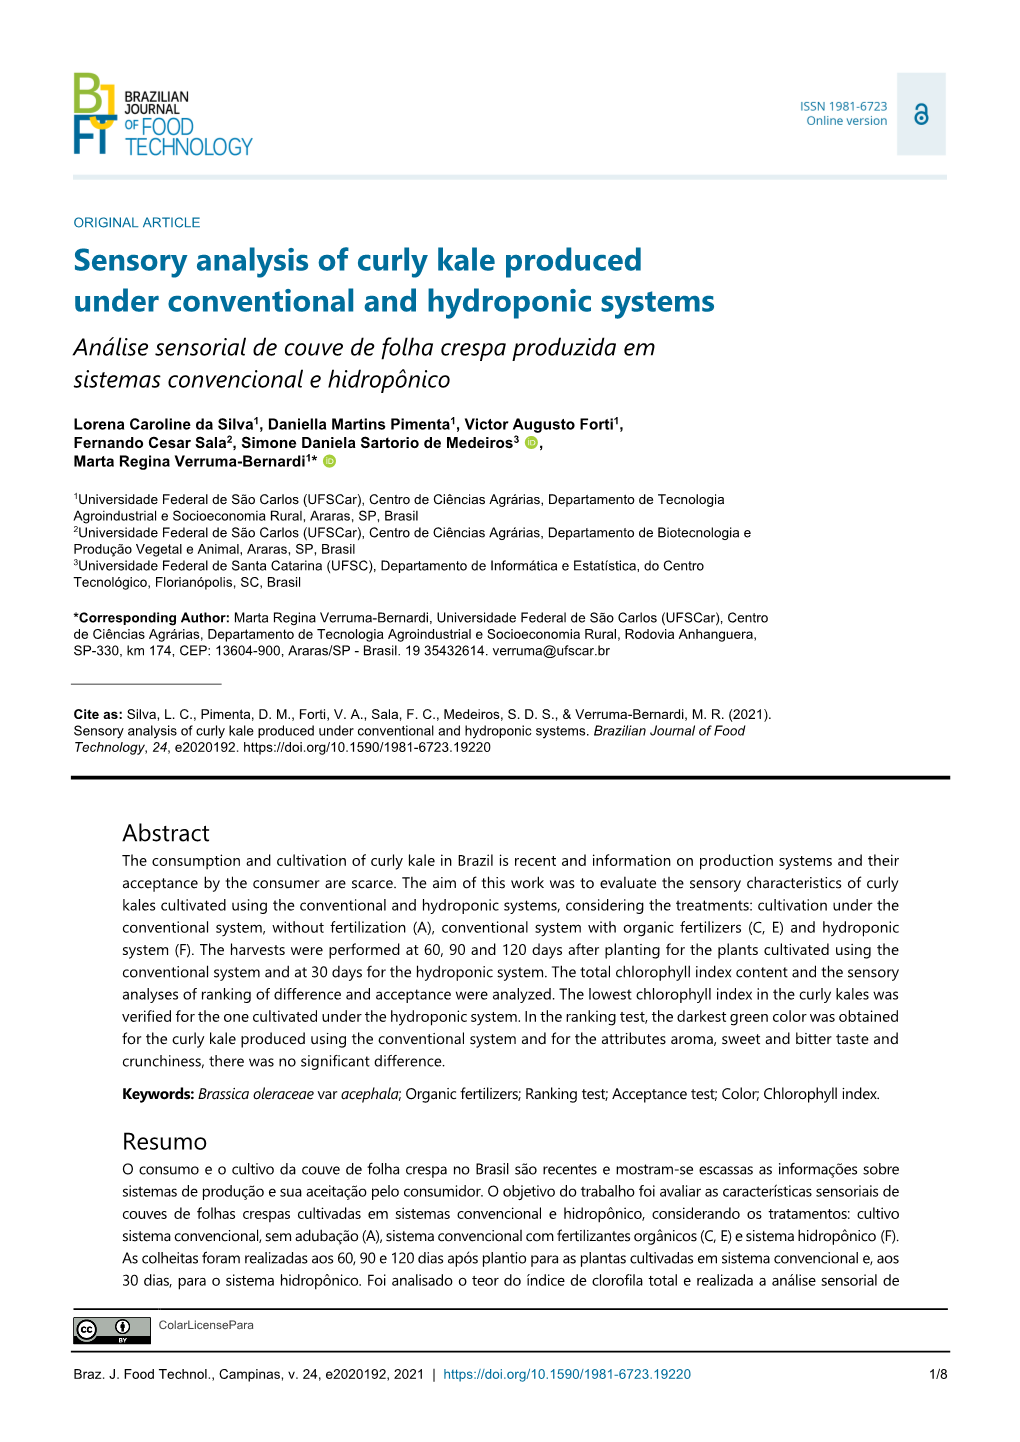 Sensory Analysis of Curly Kale Produced Under Conventional And